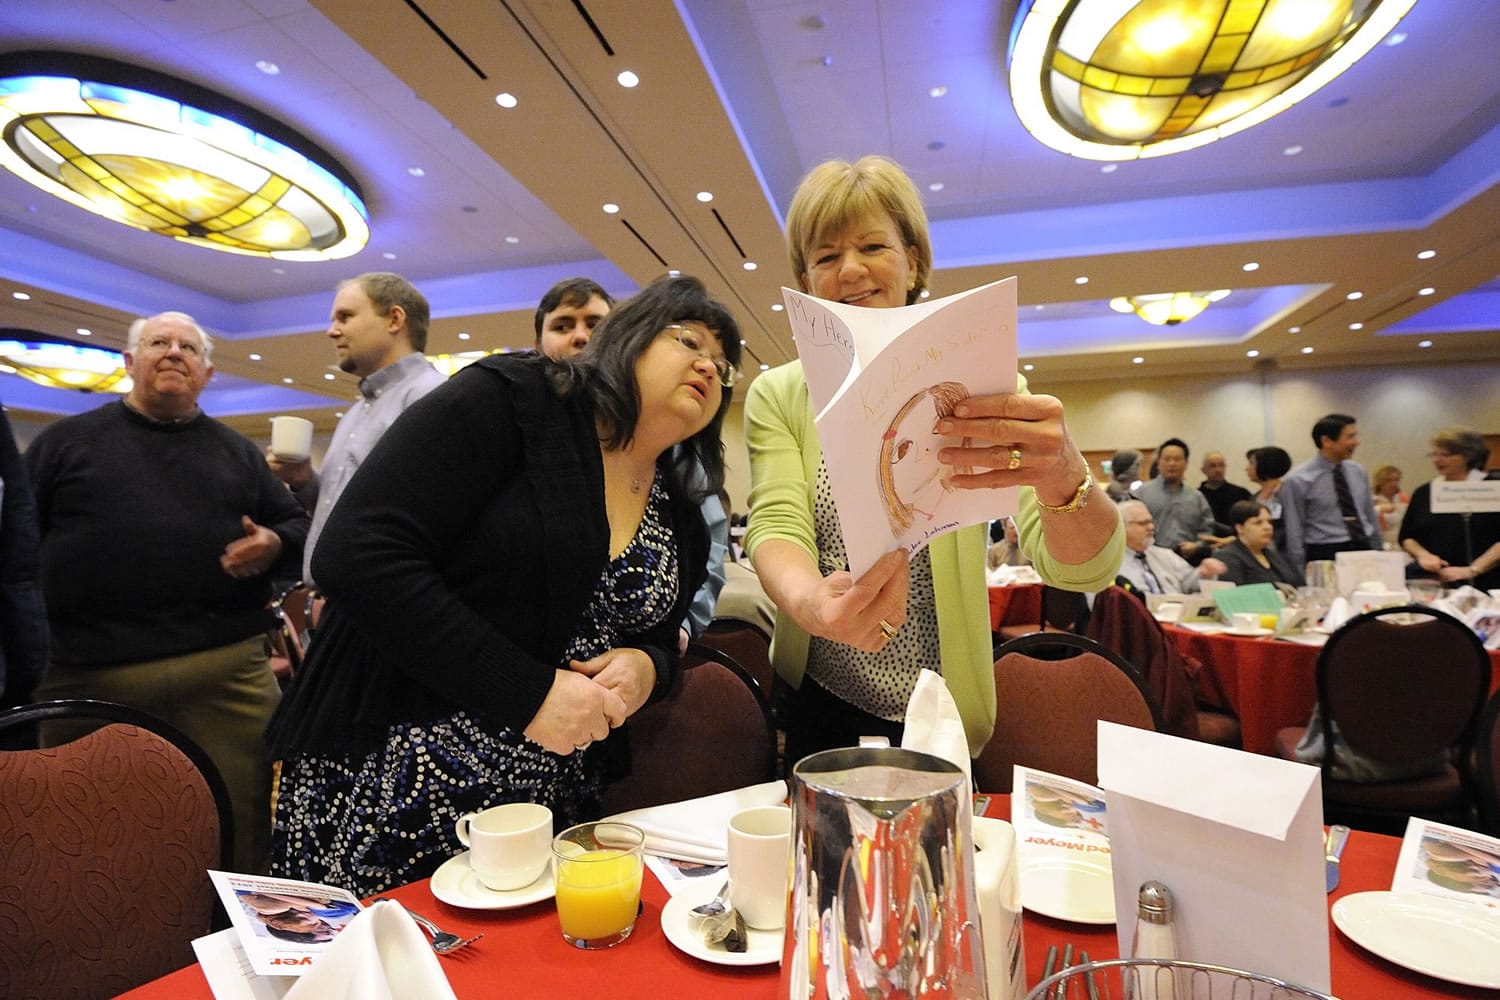 Kathy Corwin, right, shares artwork from children about who their heroes are, with Melody Bazzel, who was recognized for her efforts as an animal rescue hero at the 15th annual American Red Cross Real Heroes Breakfast on Friday in Vancouver.